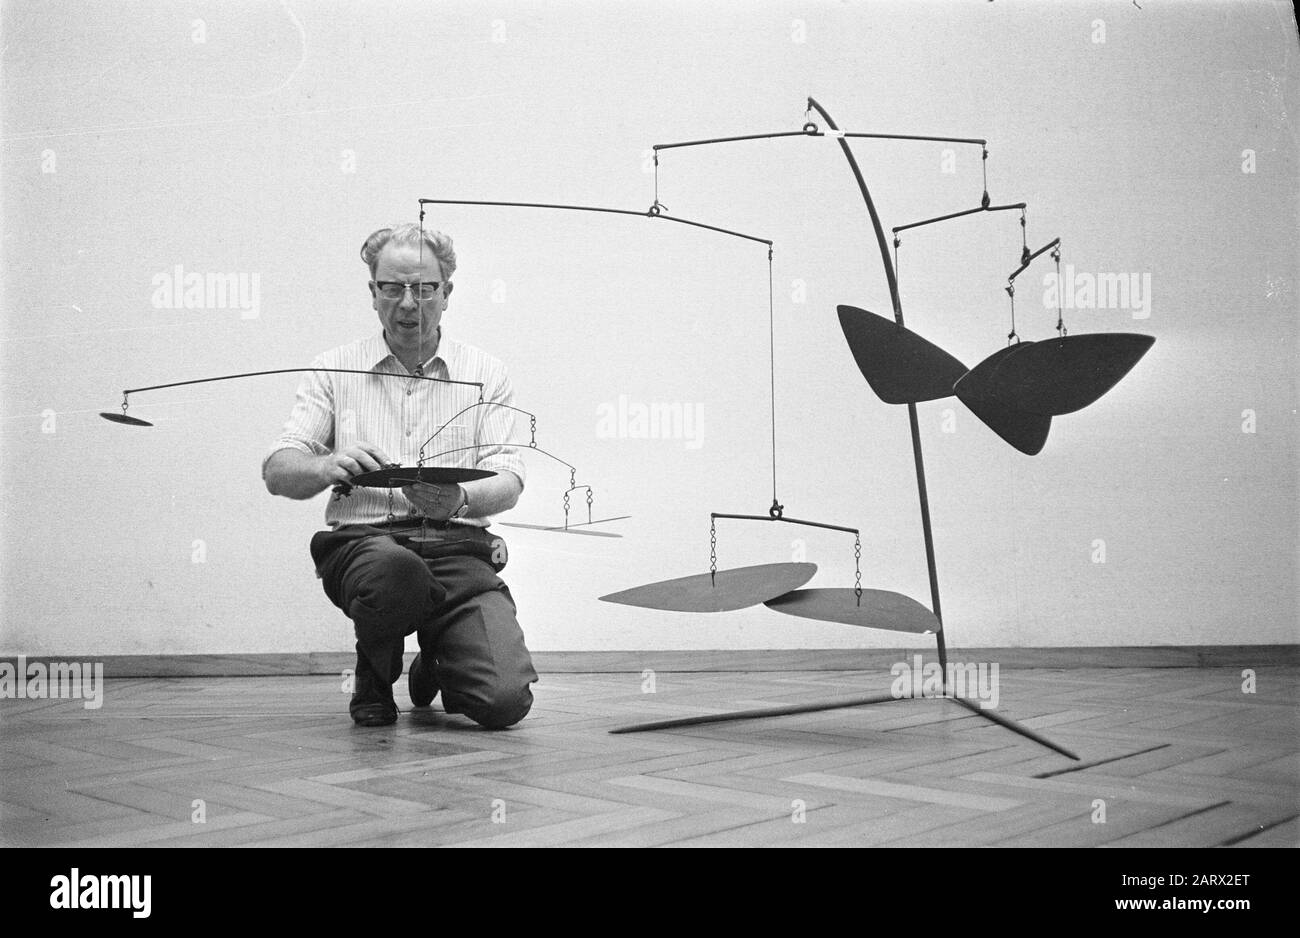 Exhibition Kinetic Plastic Am. sculptor Alexander Calder in Stedelijk Museum Amsterdam. a stable mobile is placed Date: 2 October 1969 Location: Amsterdam, Noord-Holland Keywords: MOBILES, Museums, sculptors, exhibitions Personal name: Alexander Calder Stock Photo